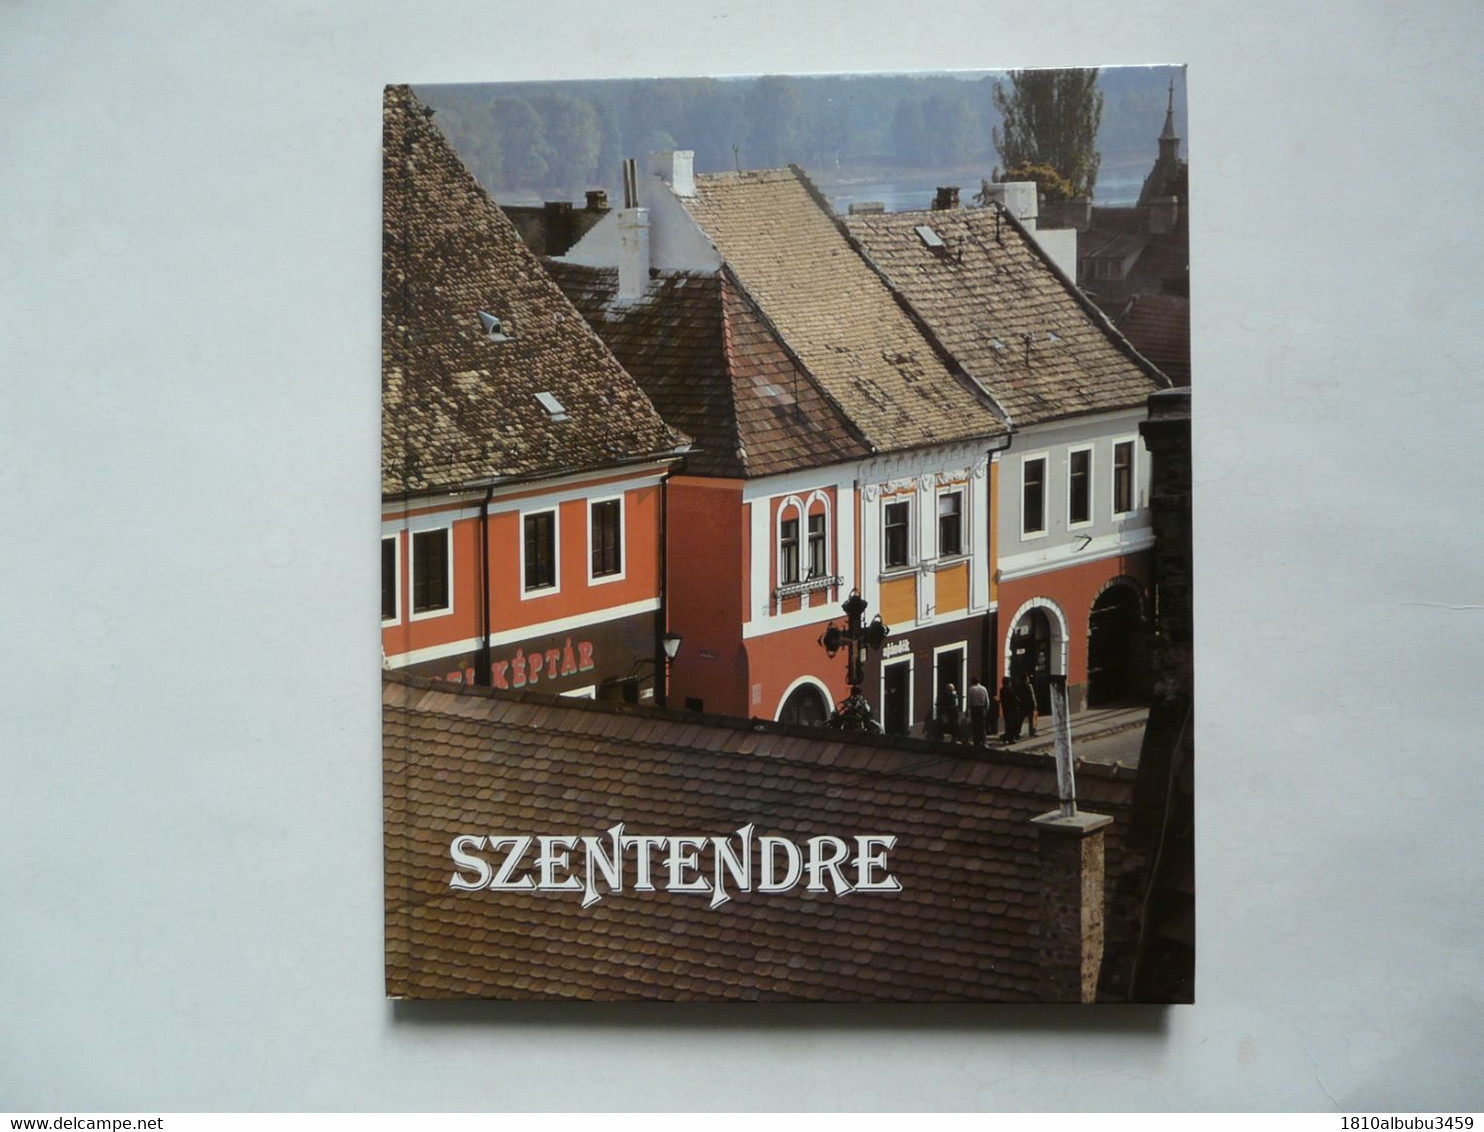 SZENTENDRE With 101 Colour Photographs By Gyula TAHIN - Kultur